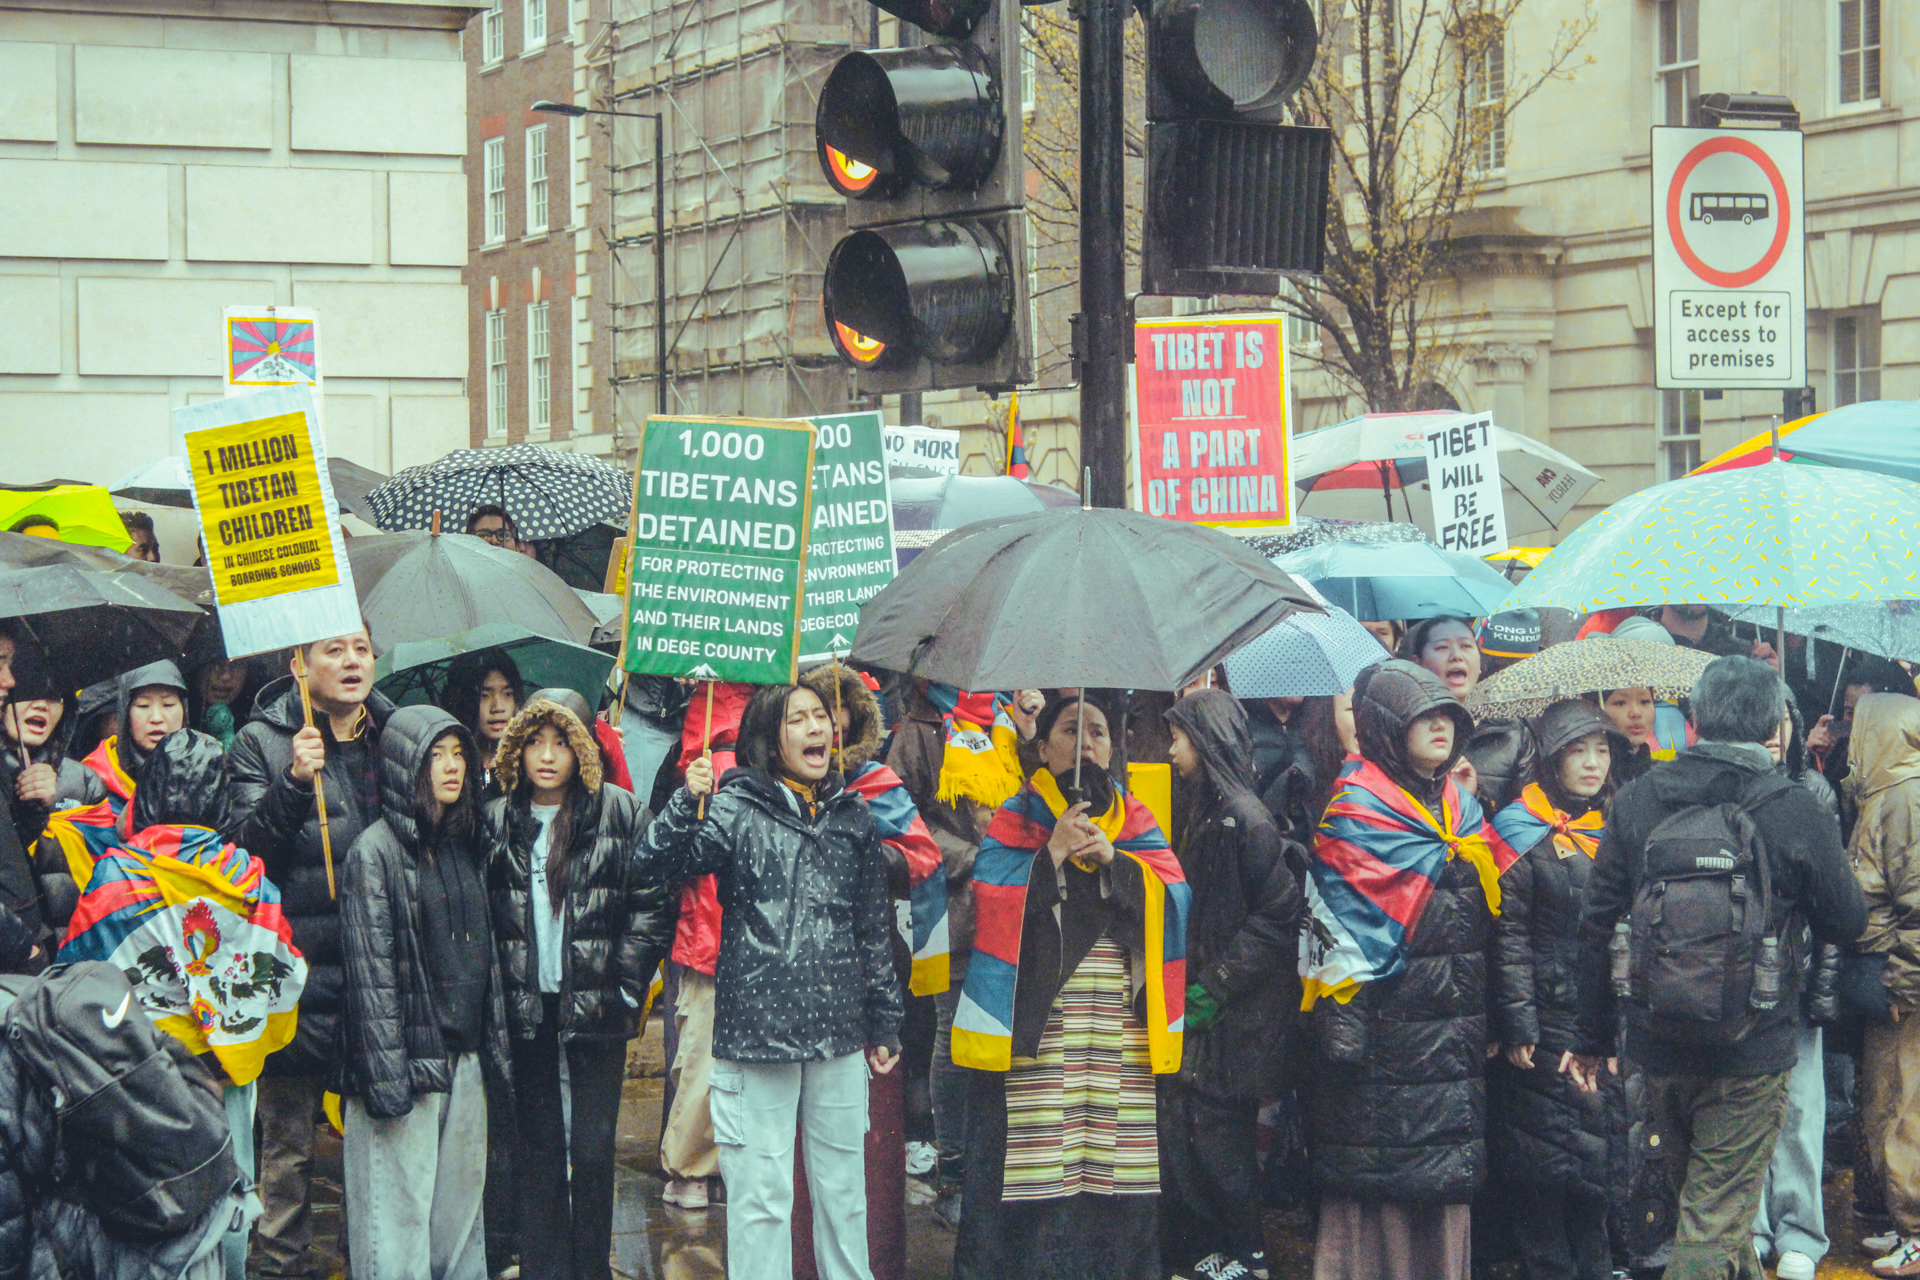 Protesters gather outside of the Chinese Embassy in London, with Tibetan flags draped over their shoulders, chanting slogans.